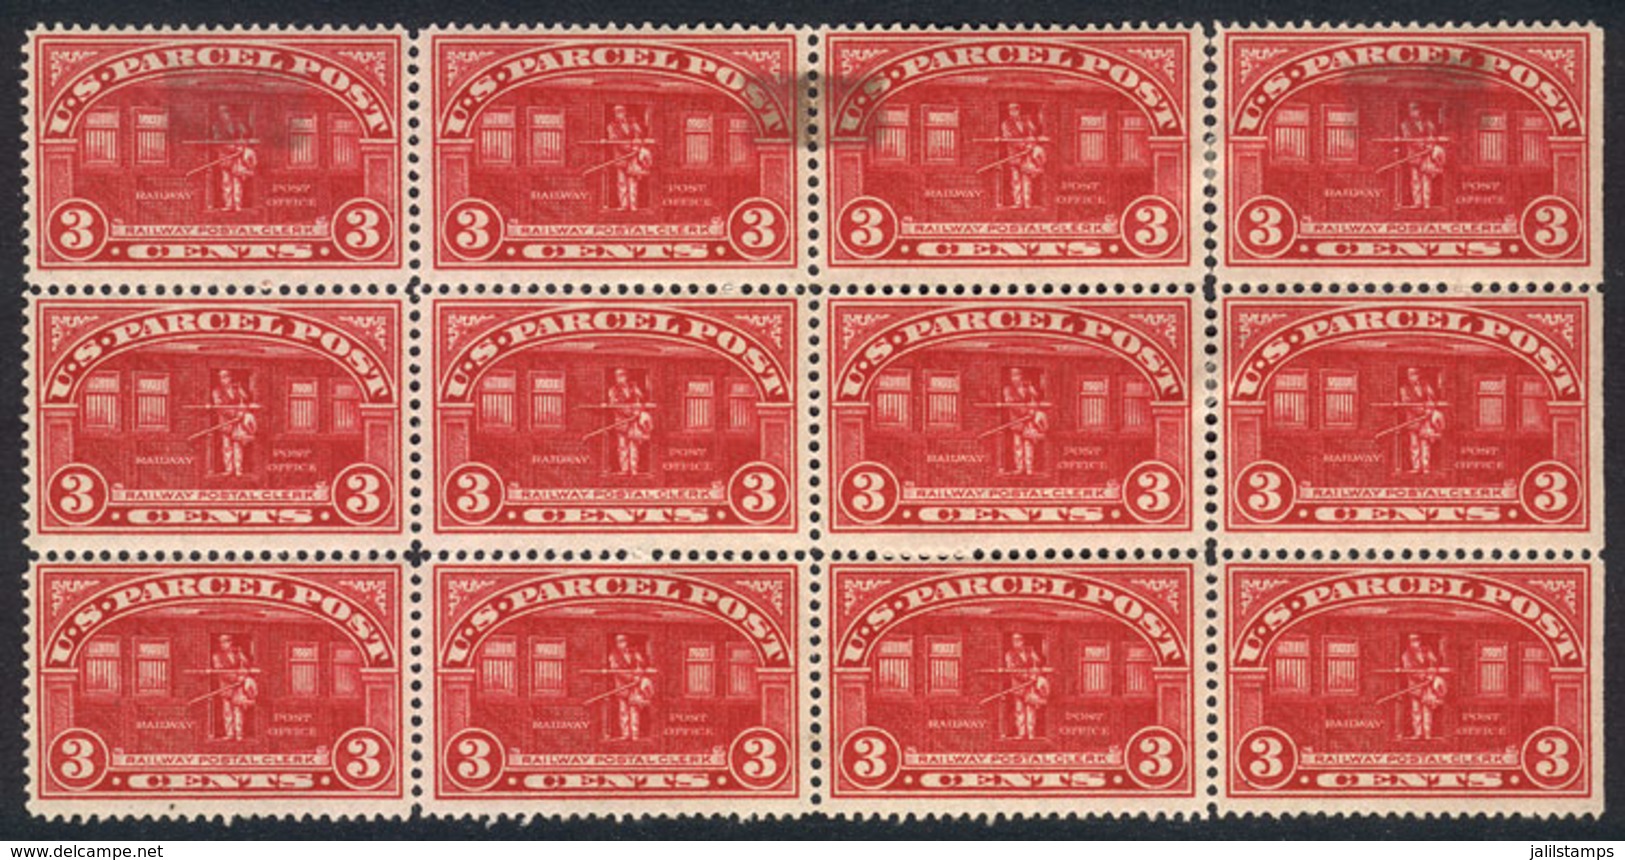 UNITED STATES: Sc.Q3, 1913 3c. Railway Postal Clerk, Beautiful BLOCK OF 12, The 4 Top Stamps With Hinge Mark Stains, The - Parcel Post & Special Handling